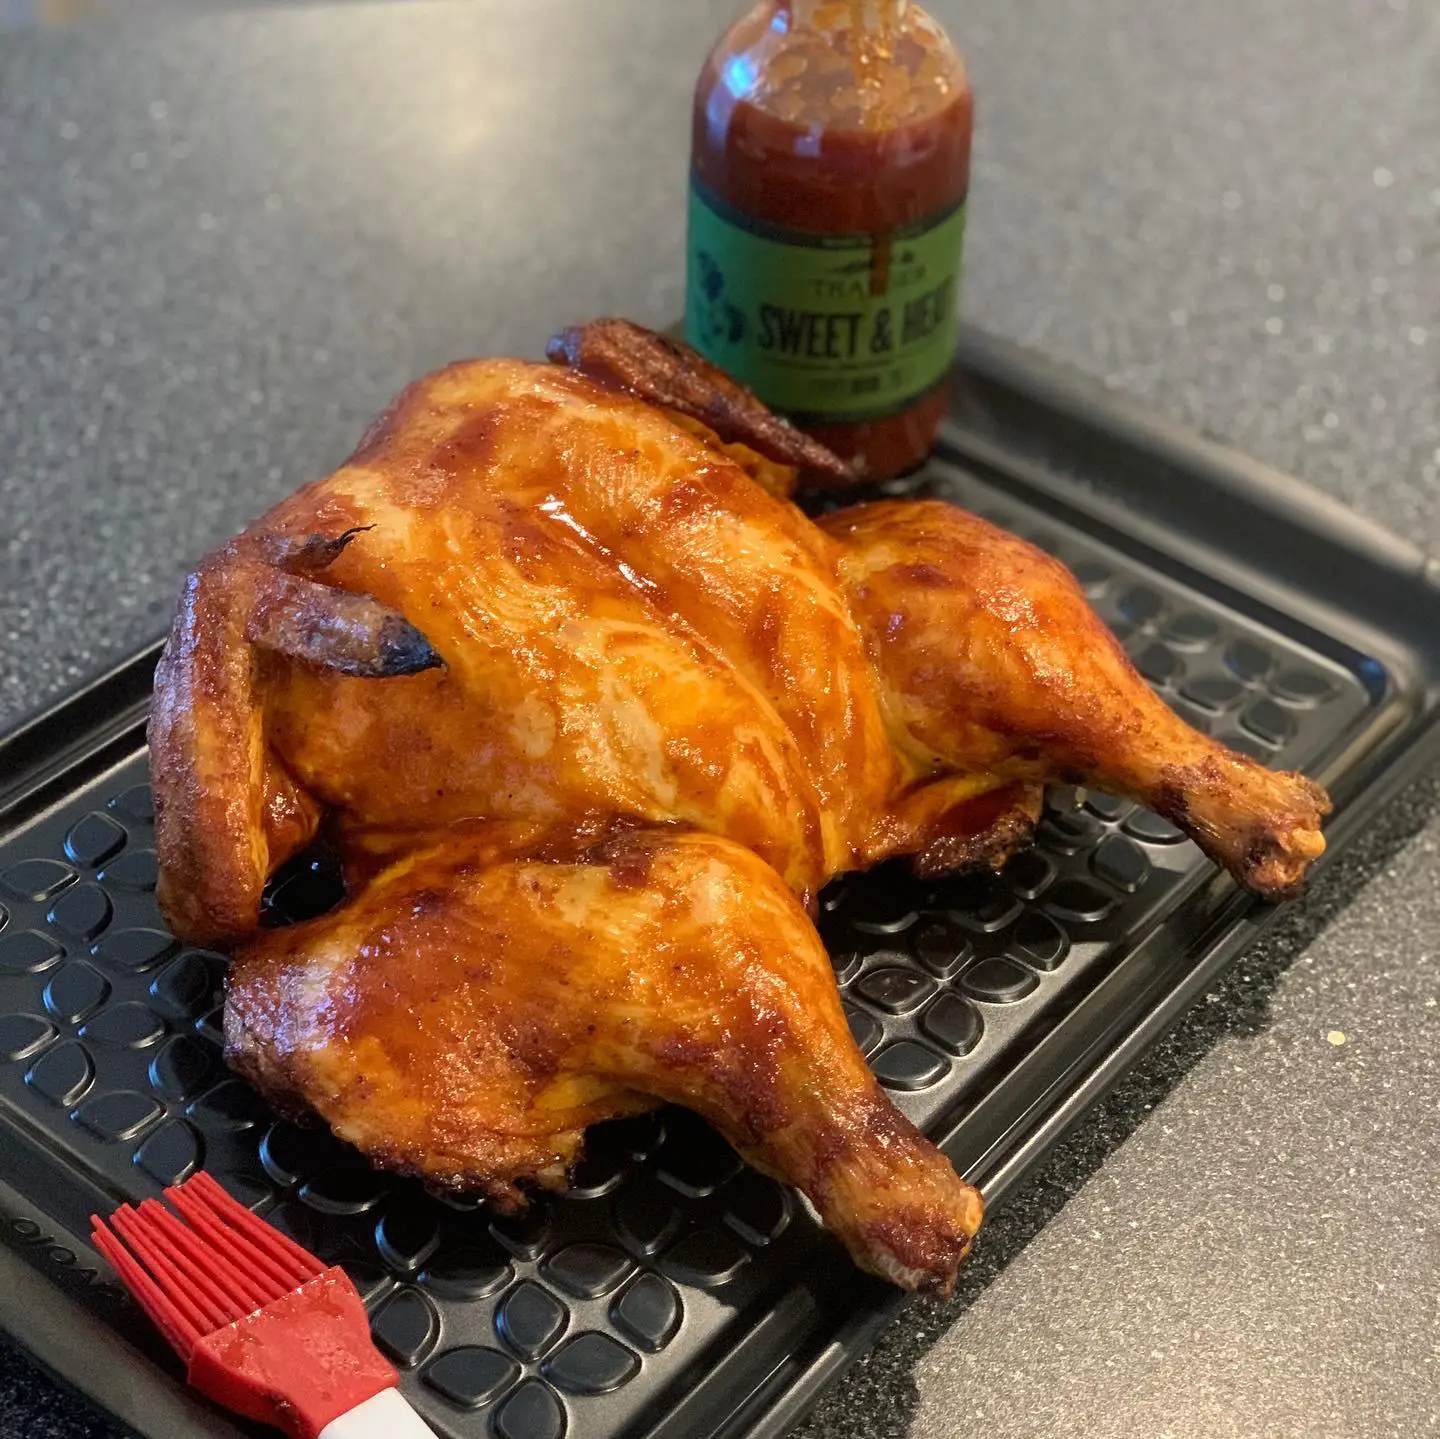 Traeger Spatchcock bbq chicken recipe. Tasted better than it looks ...